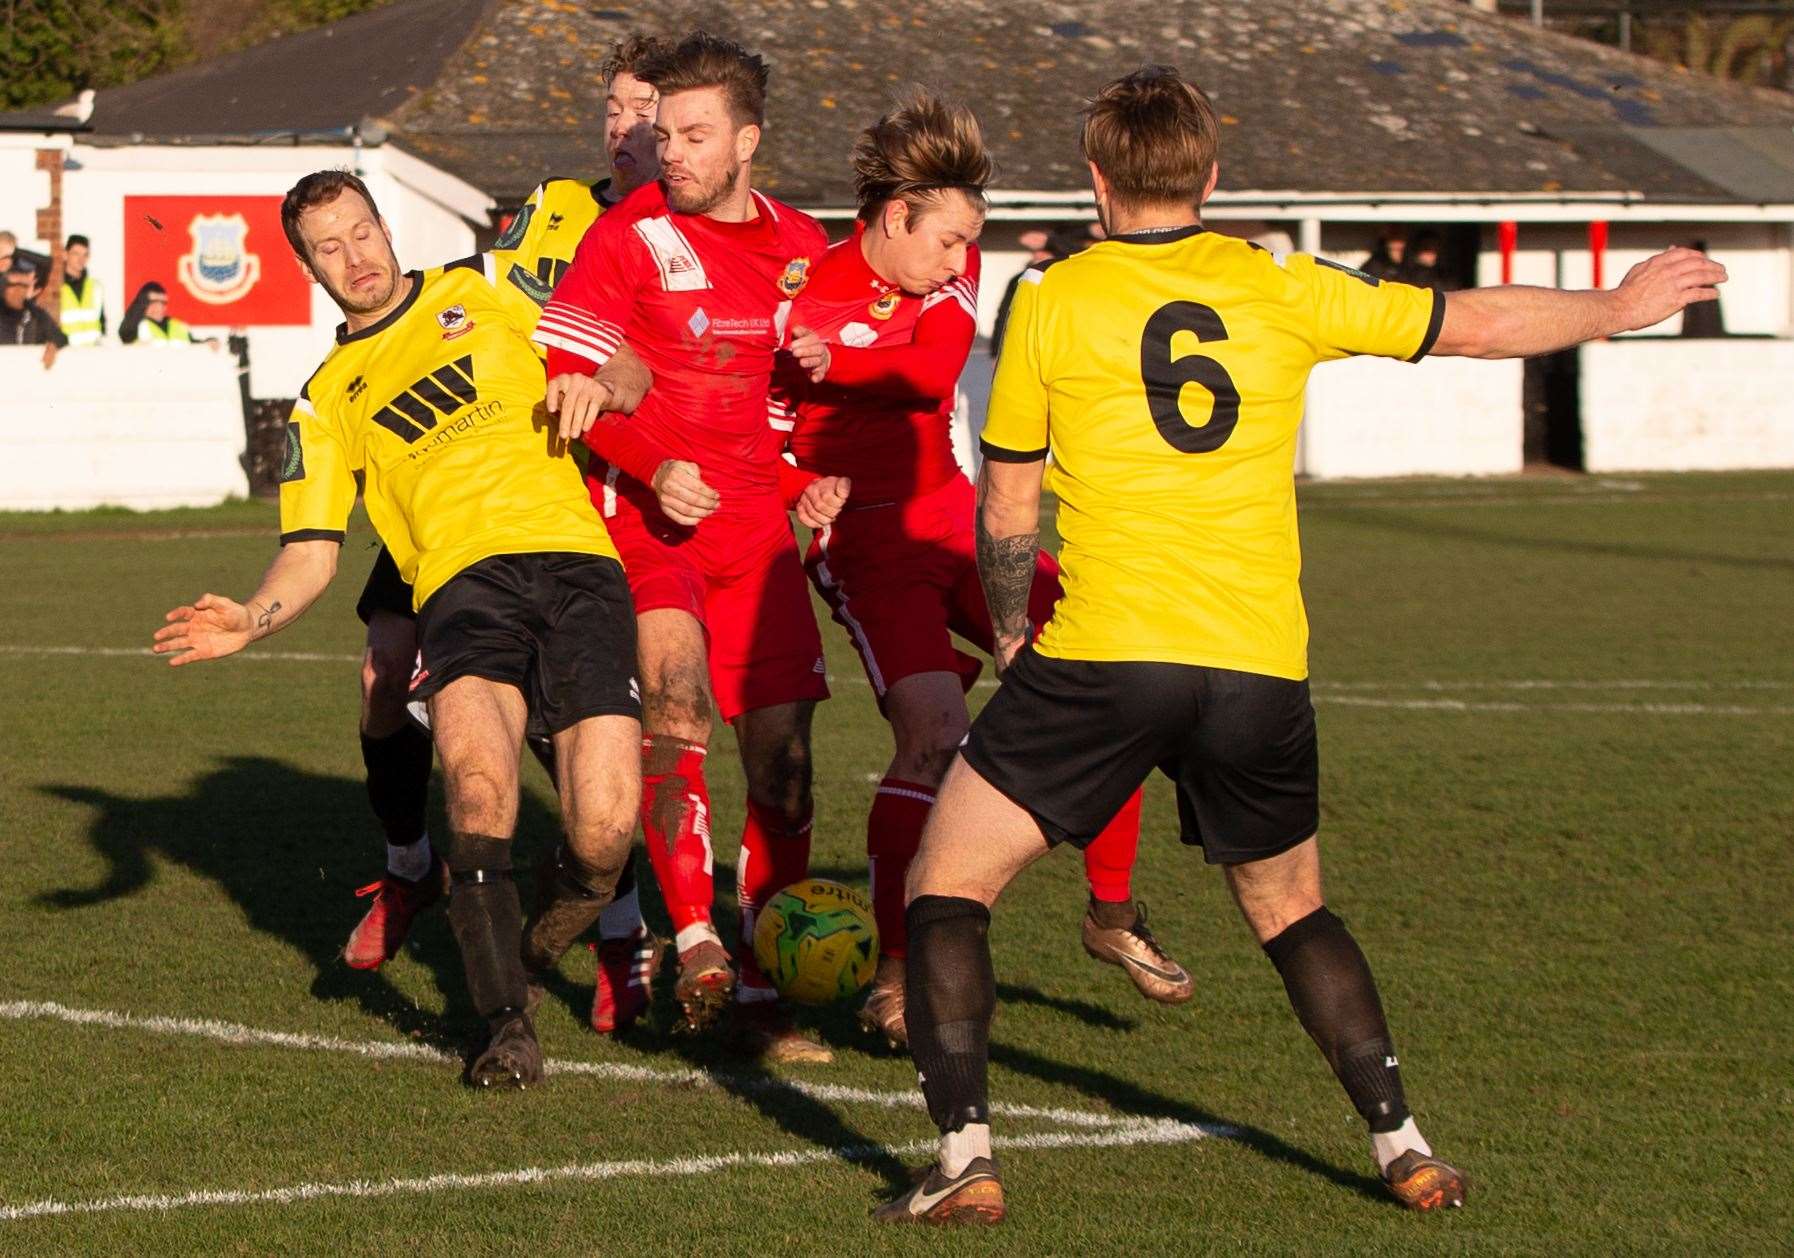 Whitstable tussle for the ball with Ramsgate on Saturday. Picture: Les Biggs